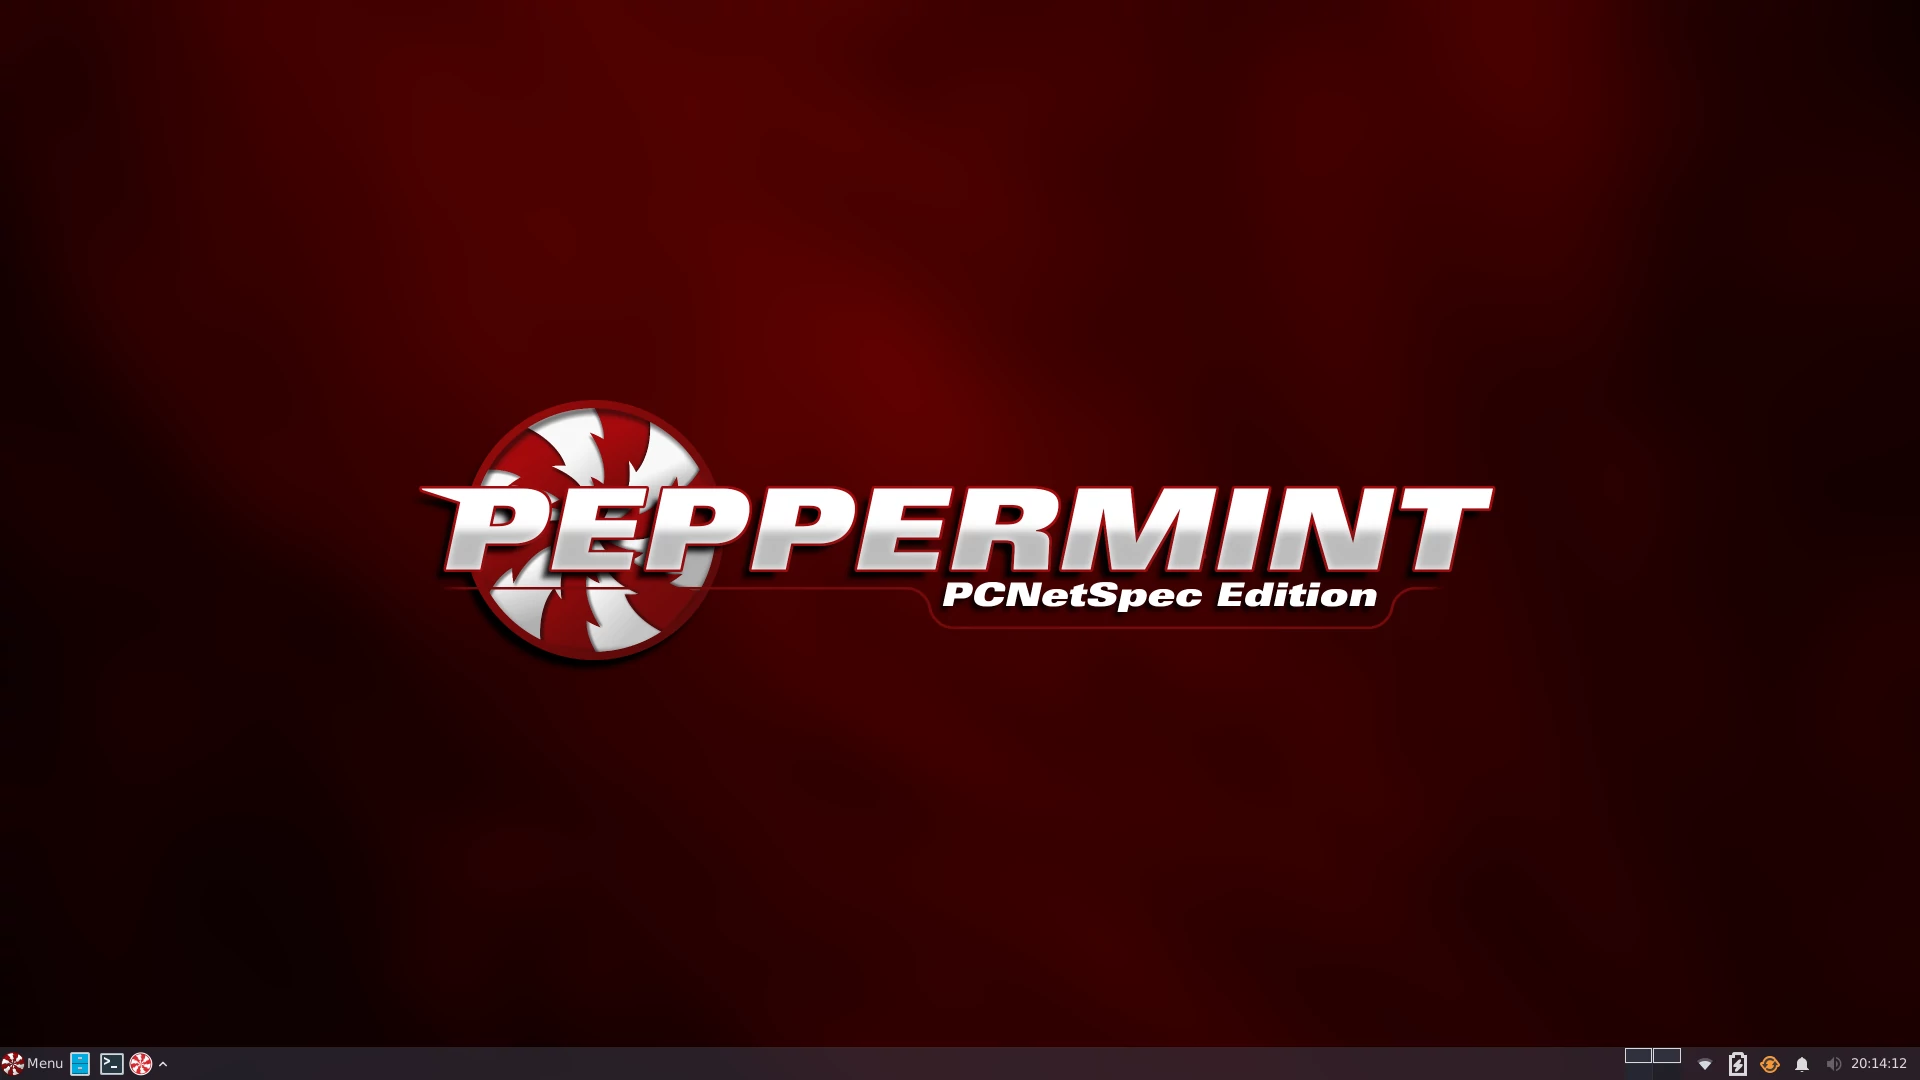 PeppermintOS 11 with the XFCE desktop